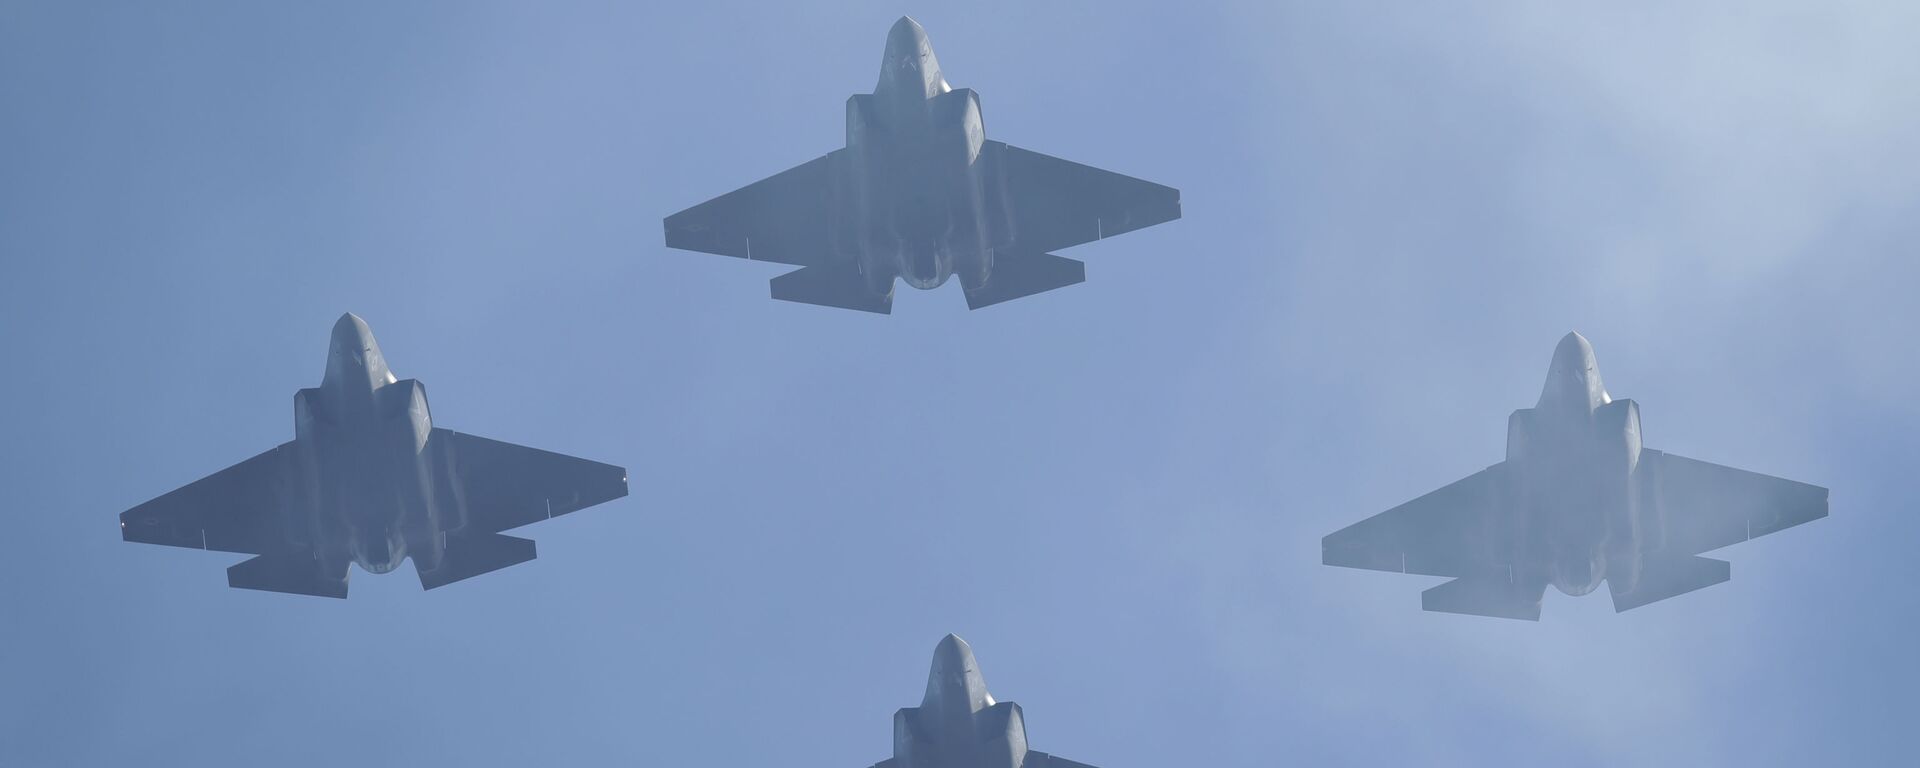 U.S. Navy F-35 jets fly over Levi's Stadium during the national anthem before an NFL divisional playoff football game between the San Francisco 49ers and the Minnesota Vikings, Saturday, Jan. 11, 2020, in Santa Clara, Calif.  - Sputnik International, 1920, 25.05.2021